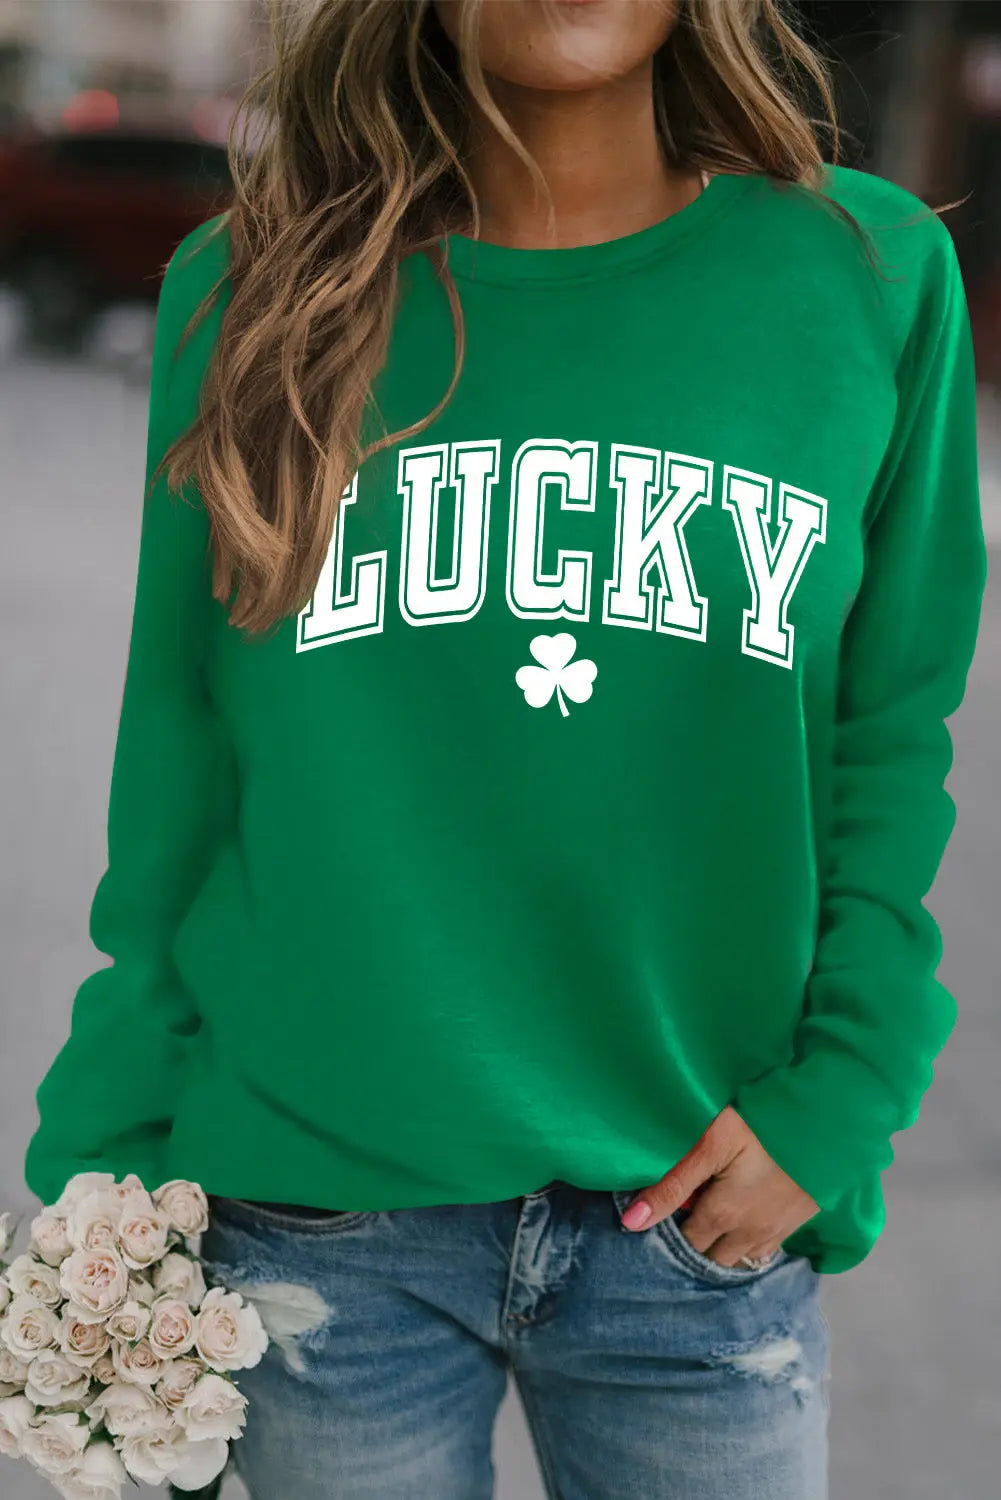 St. Patrick’s Day Cute Tops to Flaunt Your Festive Flair